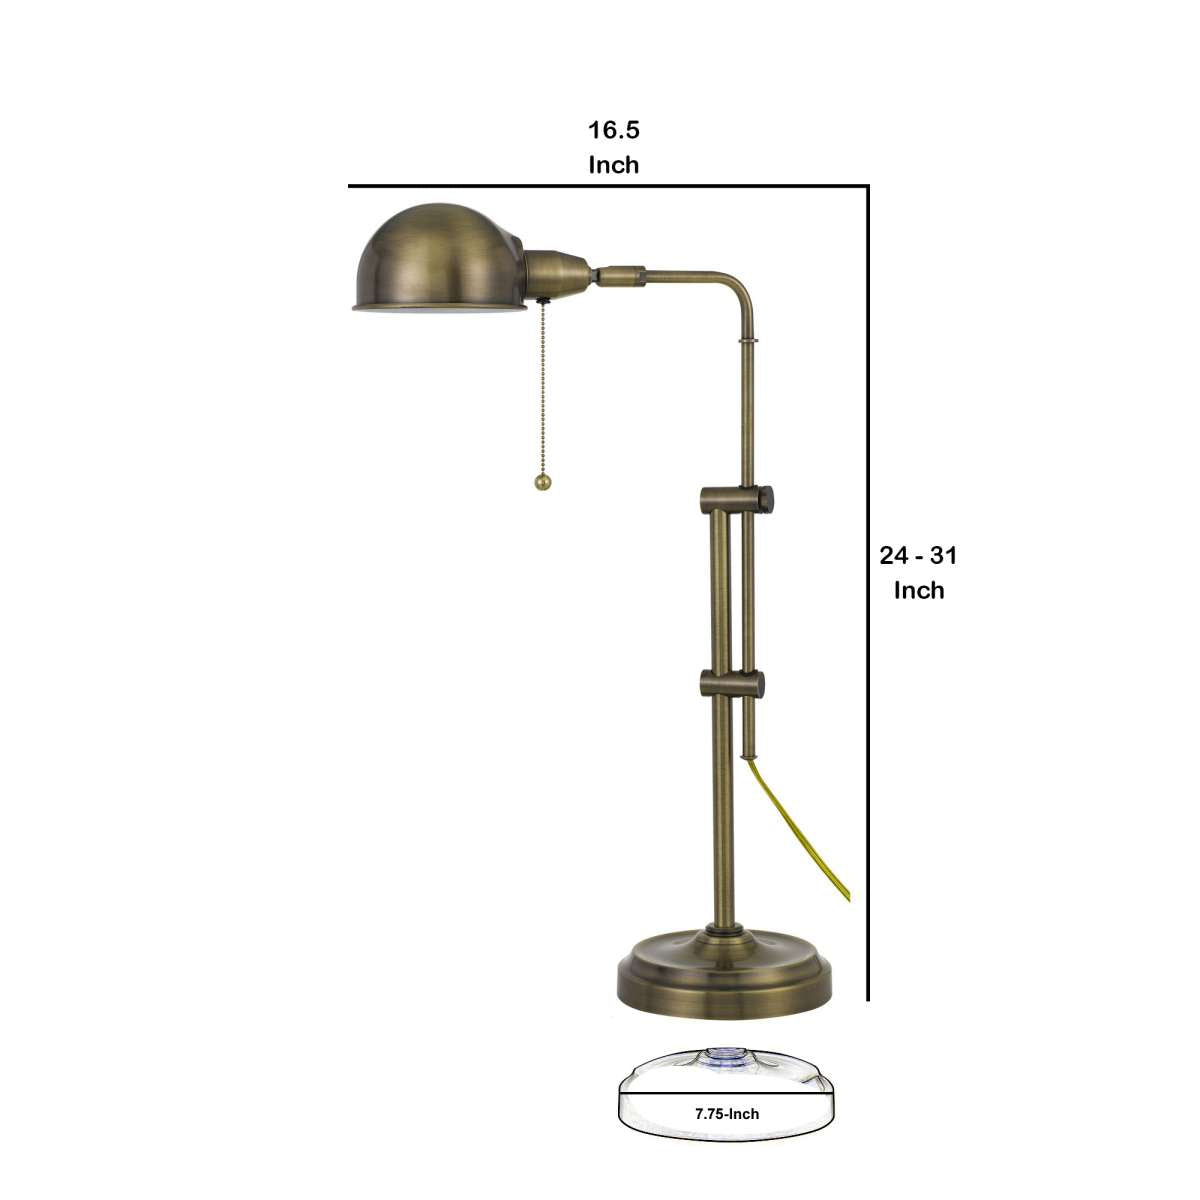 Adjustable Height Metal Desk Lamp With Dome Shade, Brass By Benzara